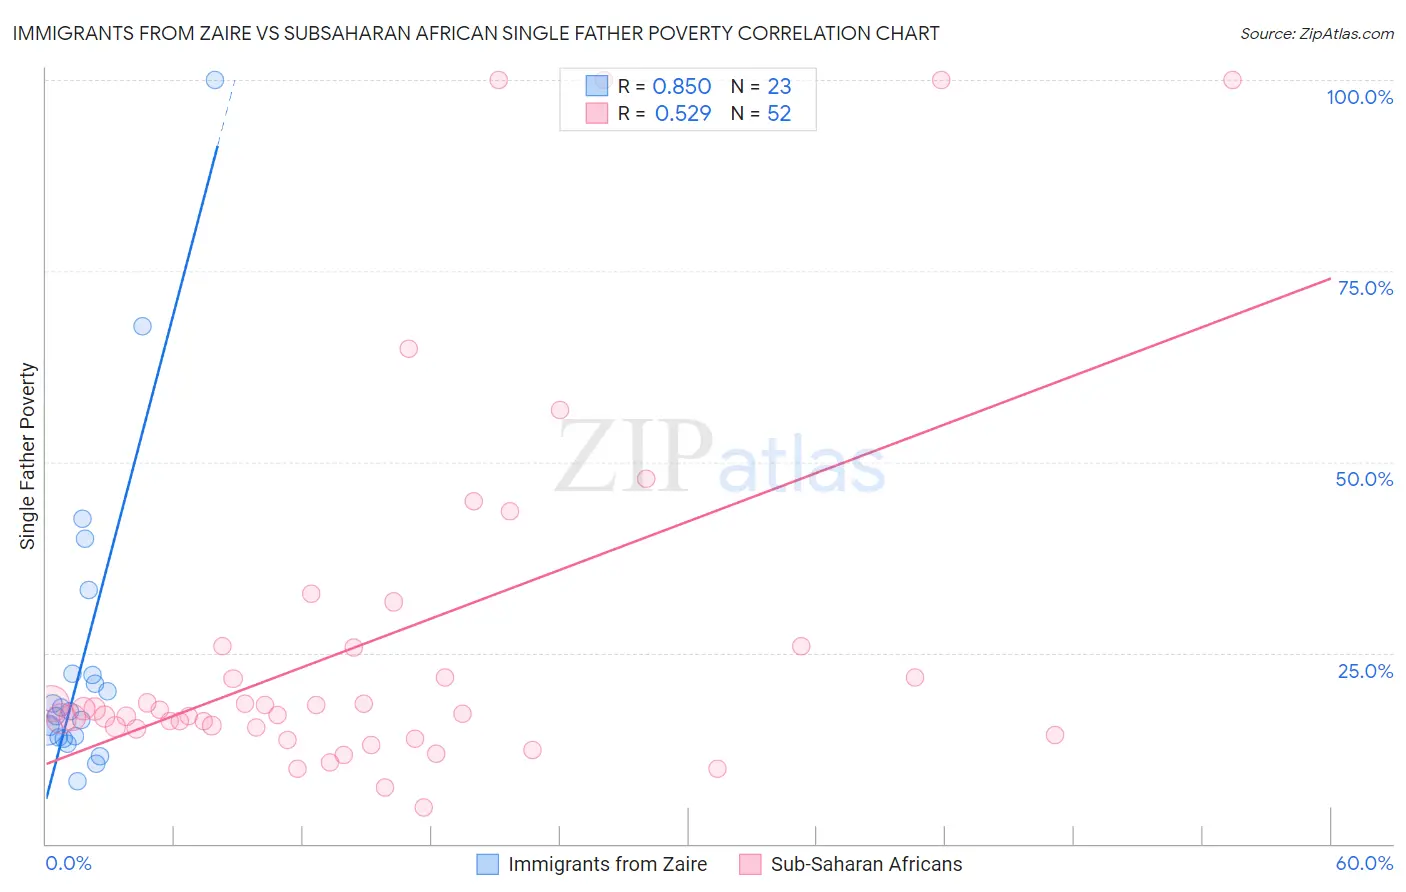 Immigrants from Zaire vs Subsaharan African Single Father Poverty